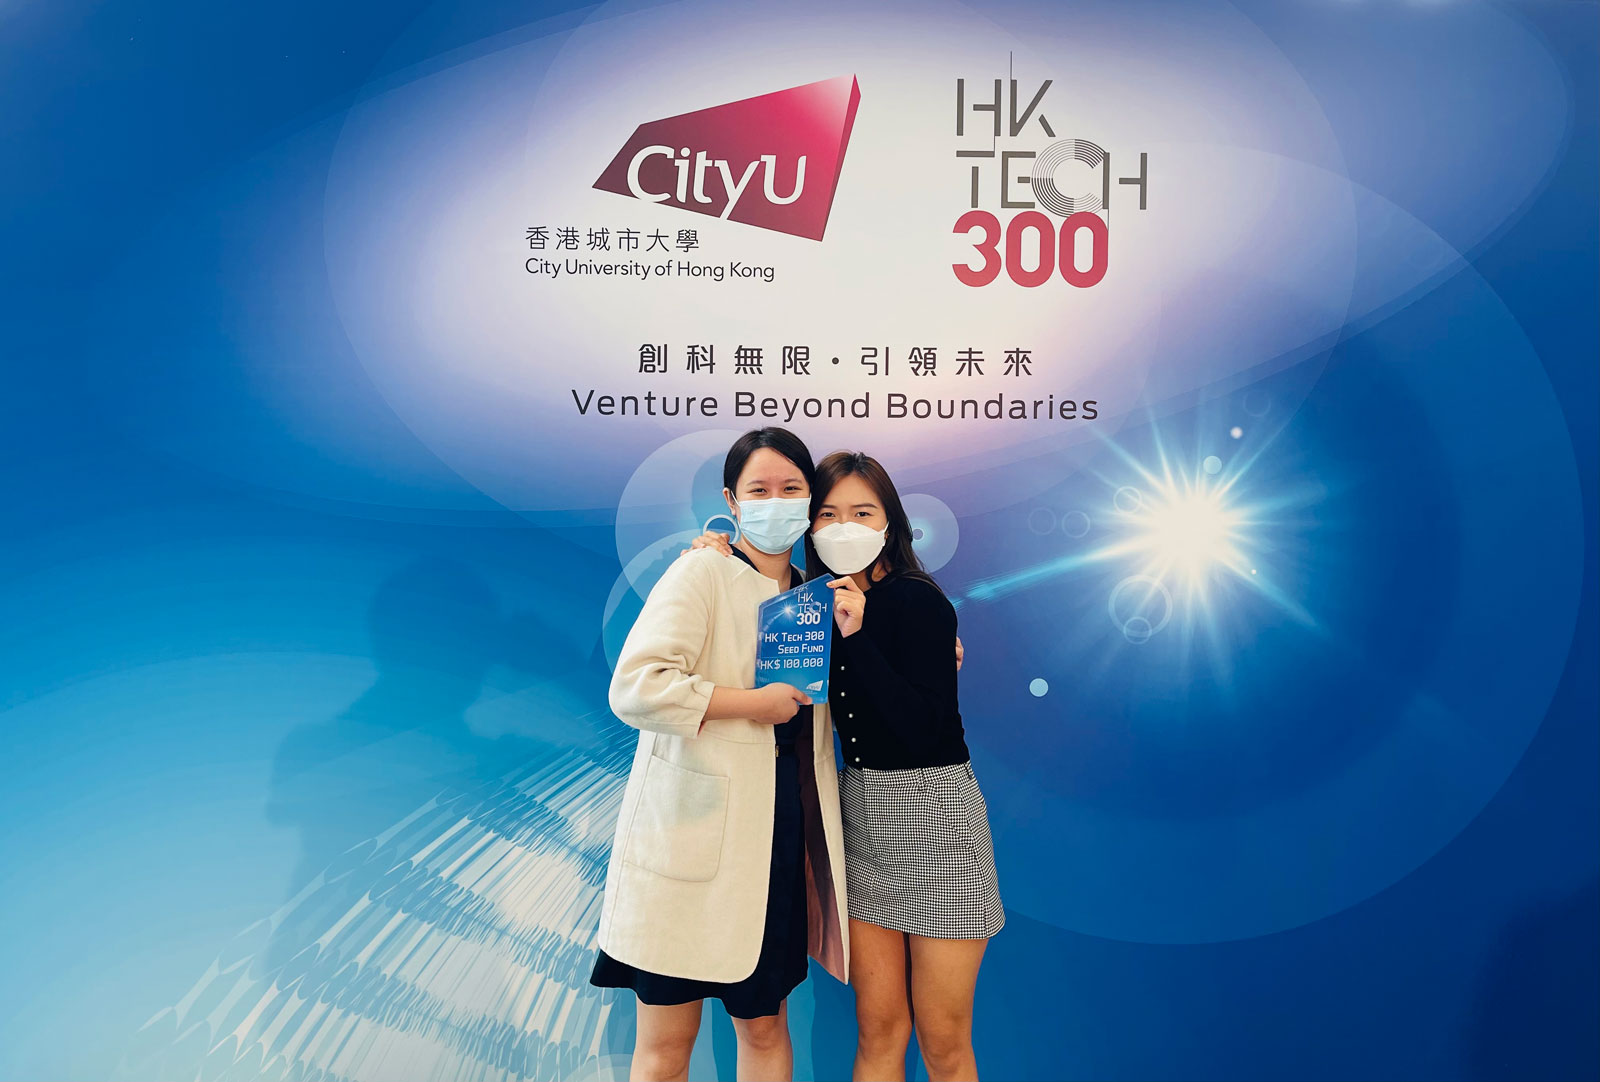 I am excited that iLandy has recently received funding from the CityU HK Tech 300 and HKSTP STEP programmes. The project has also clinched The Greatest Prospect Award in the BOCHK Challenge 2020-21. These achievements are truly a shot in the arm for us to work hard to develop and validate our idea.